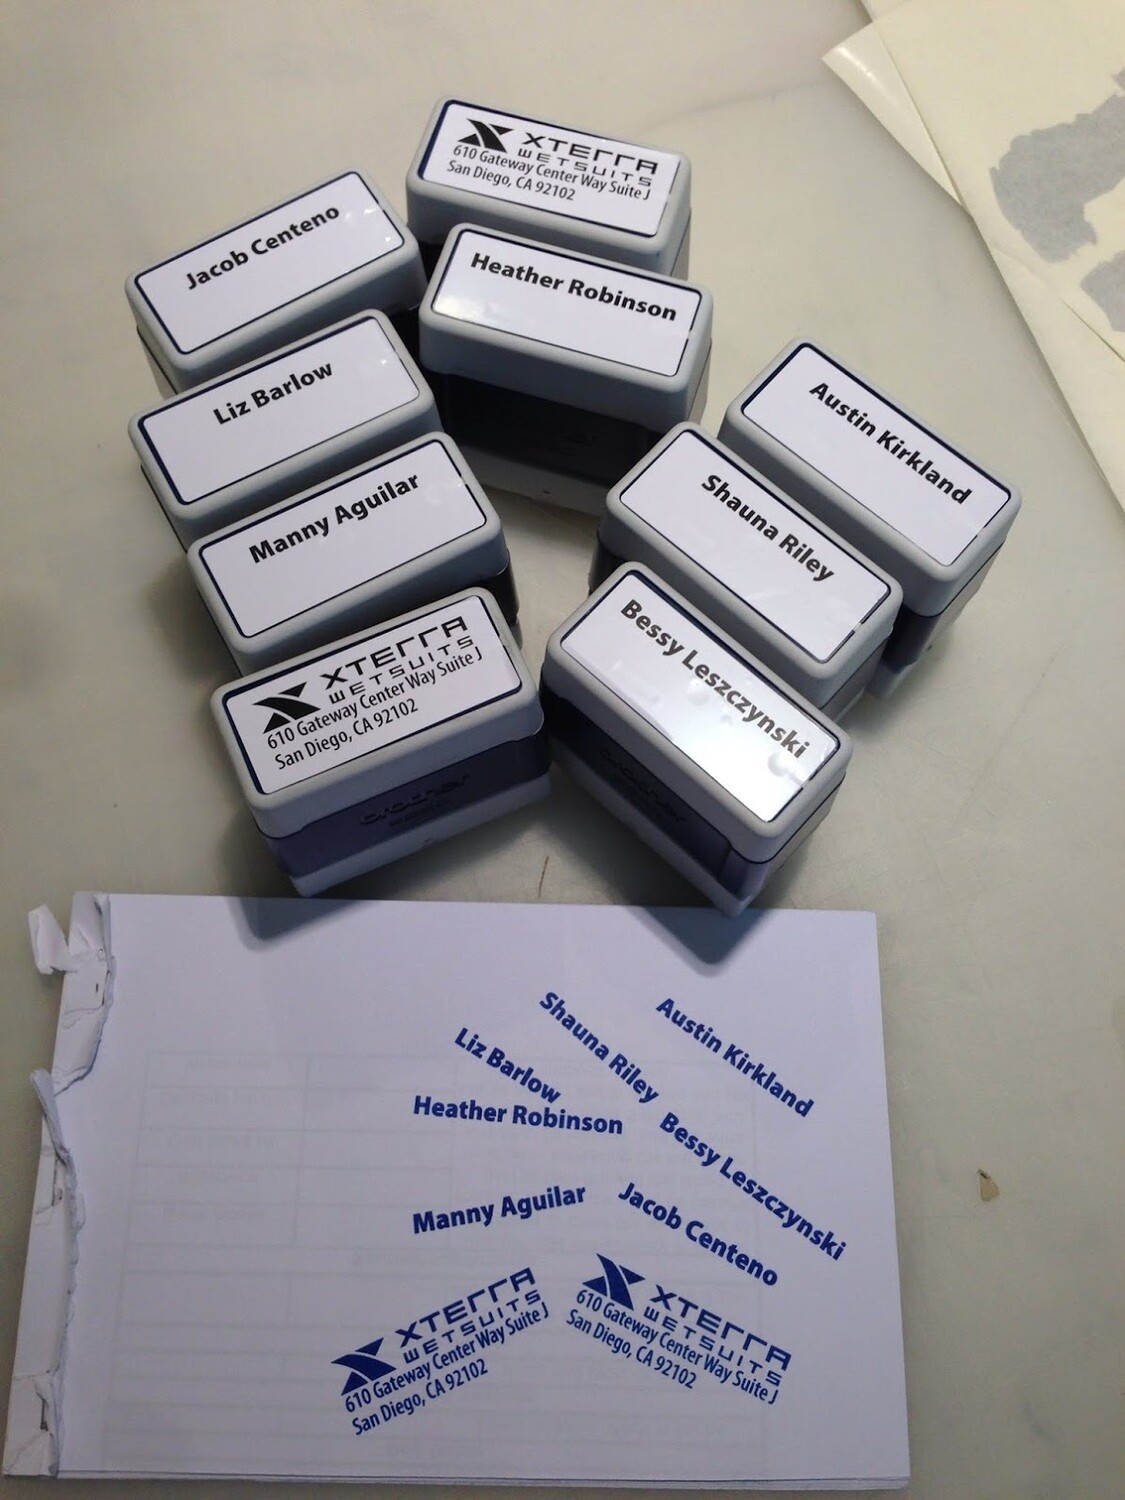 Self-Inking Stamps